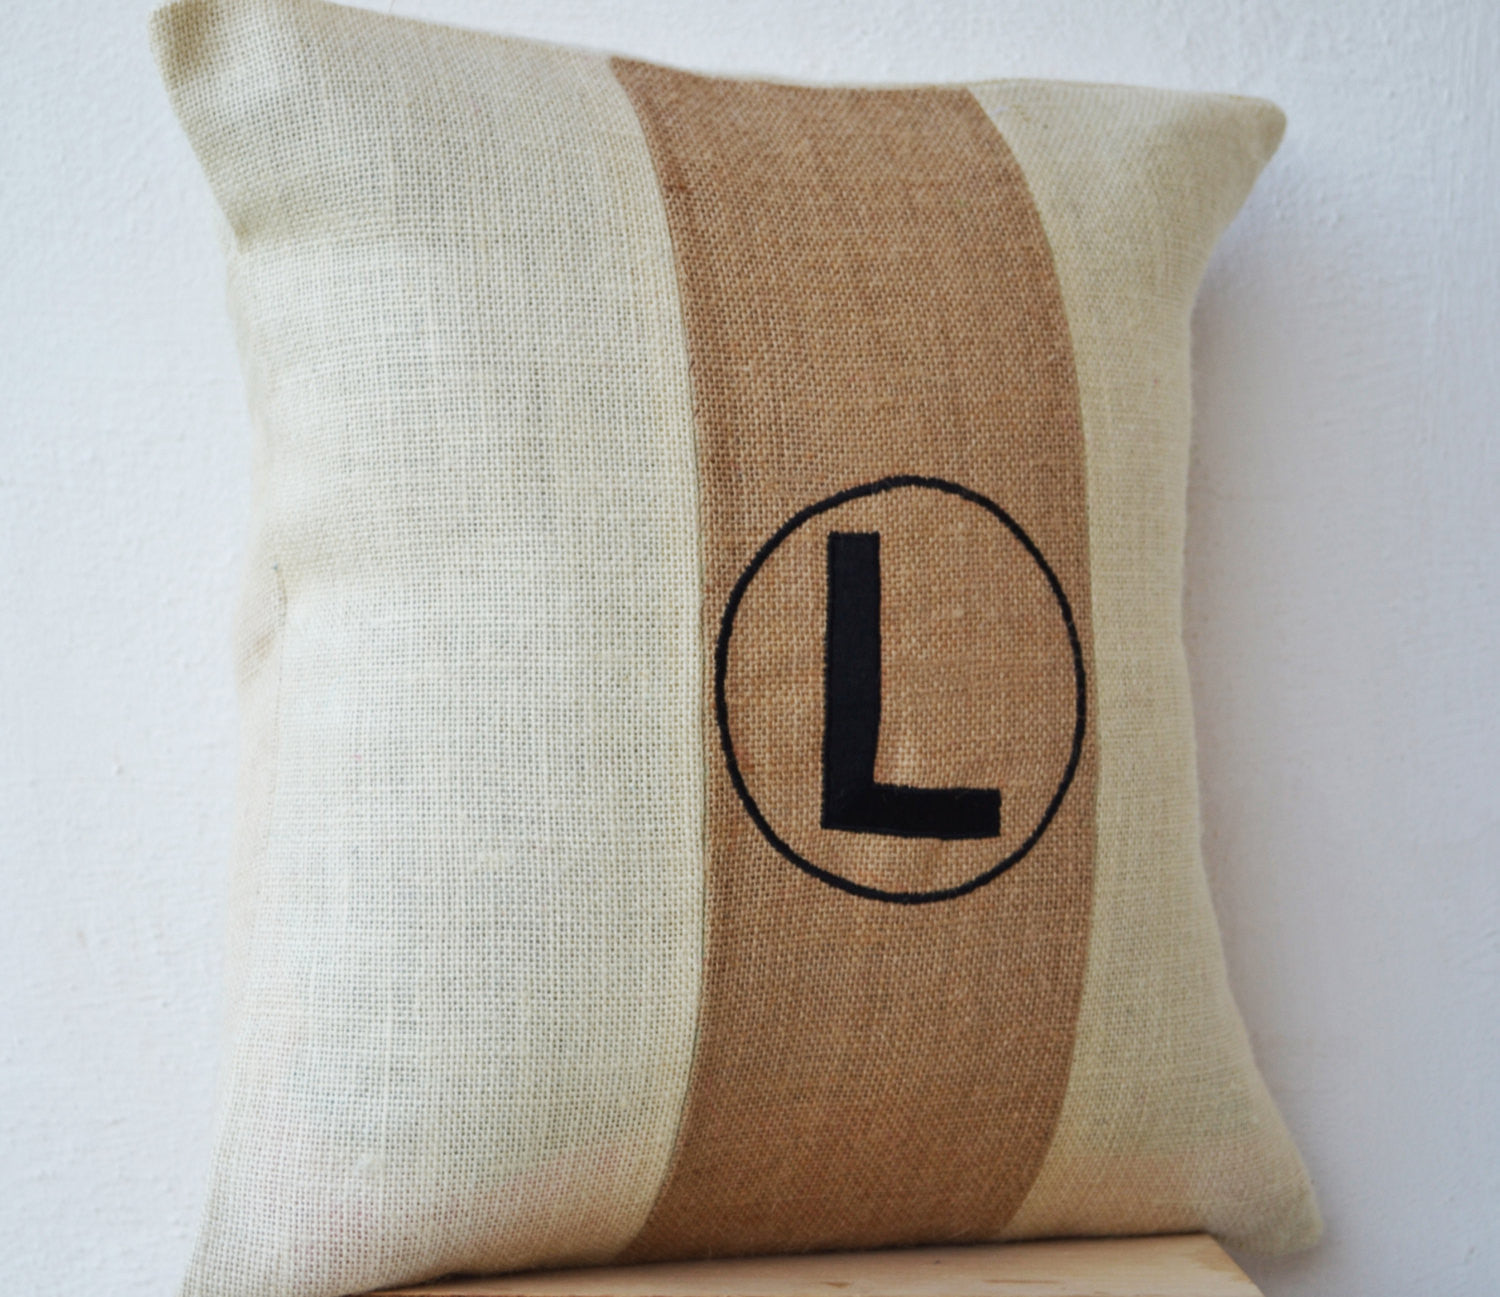 Handmade beige ivory throw pillow with color block and monogram